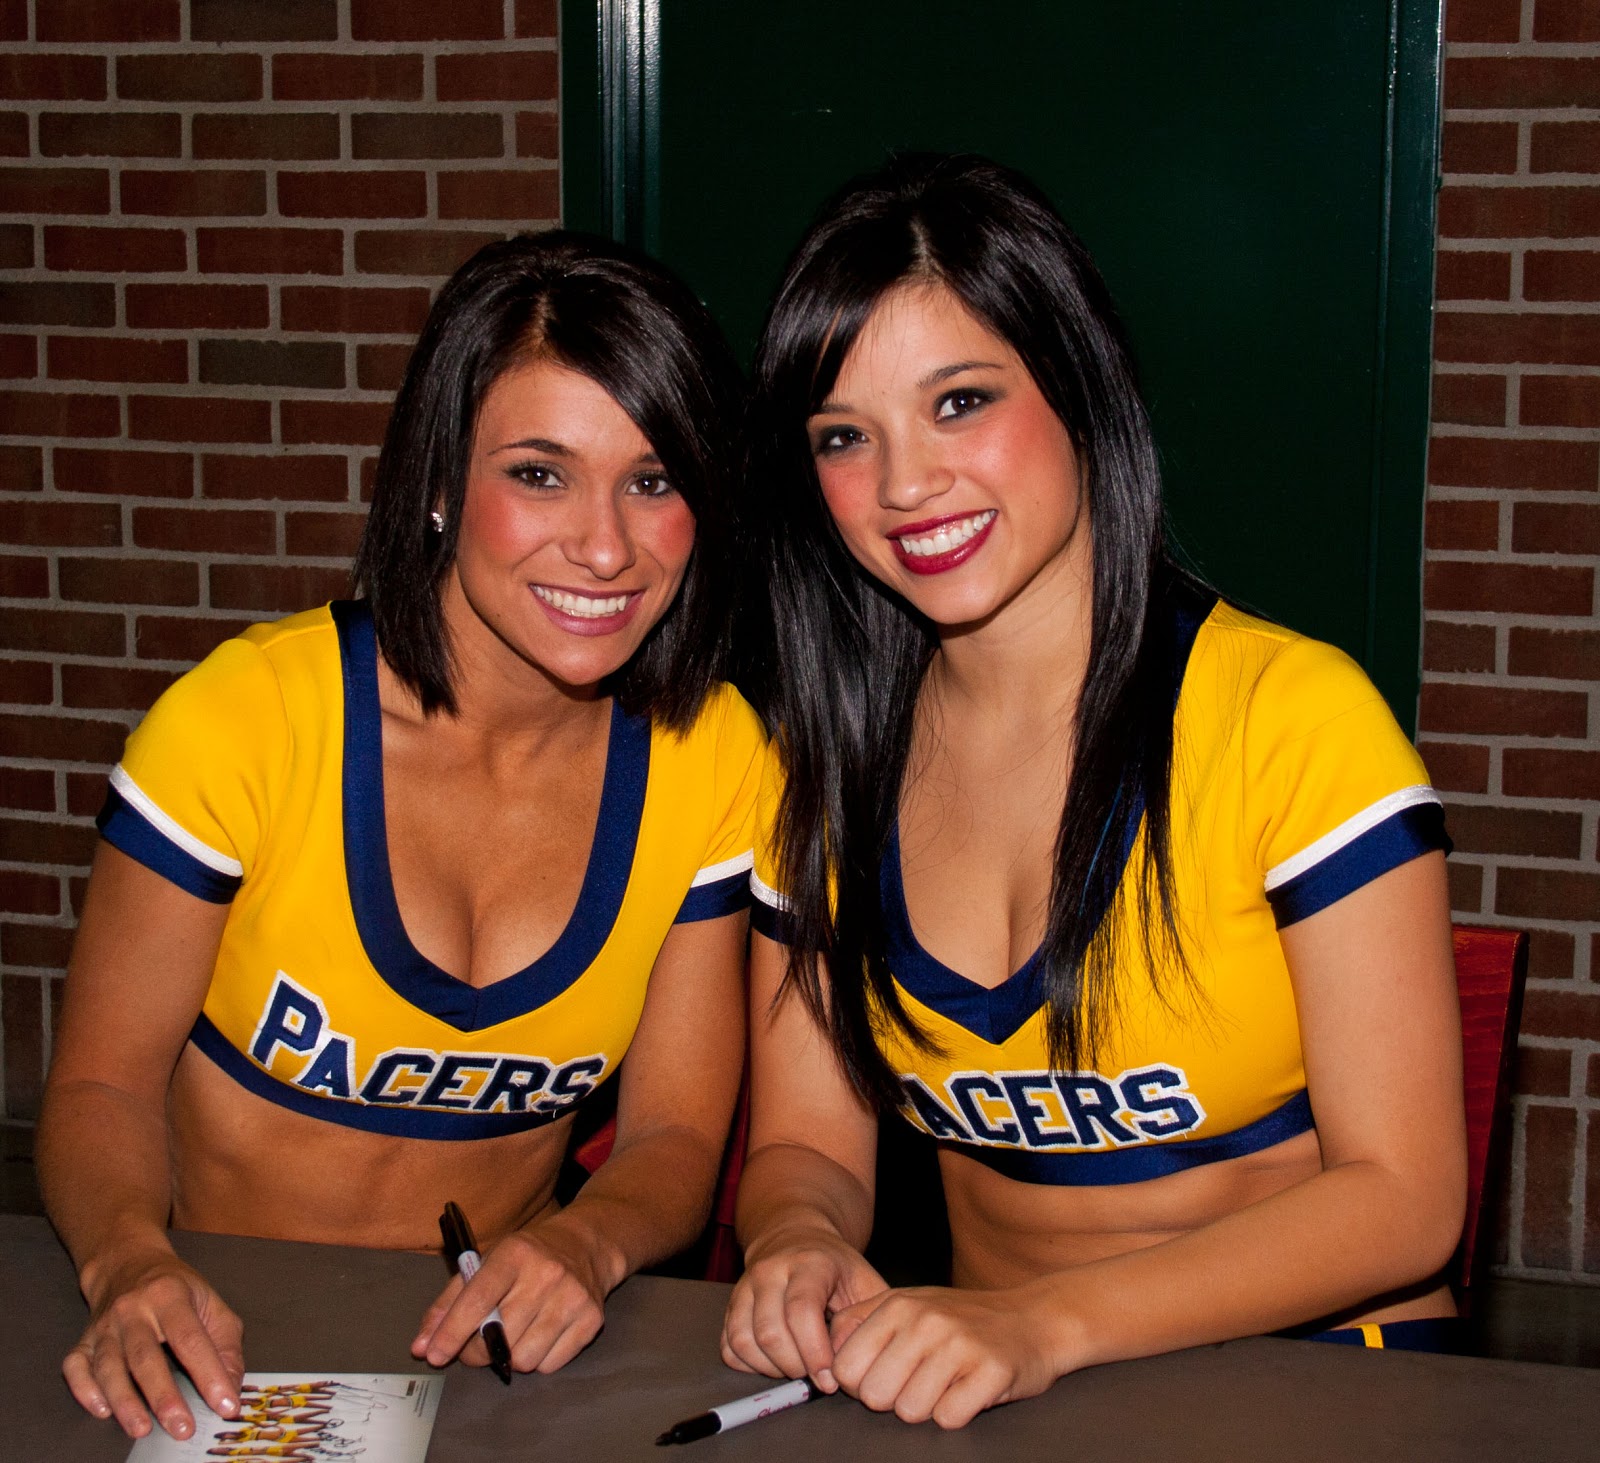 Pacemates! 